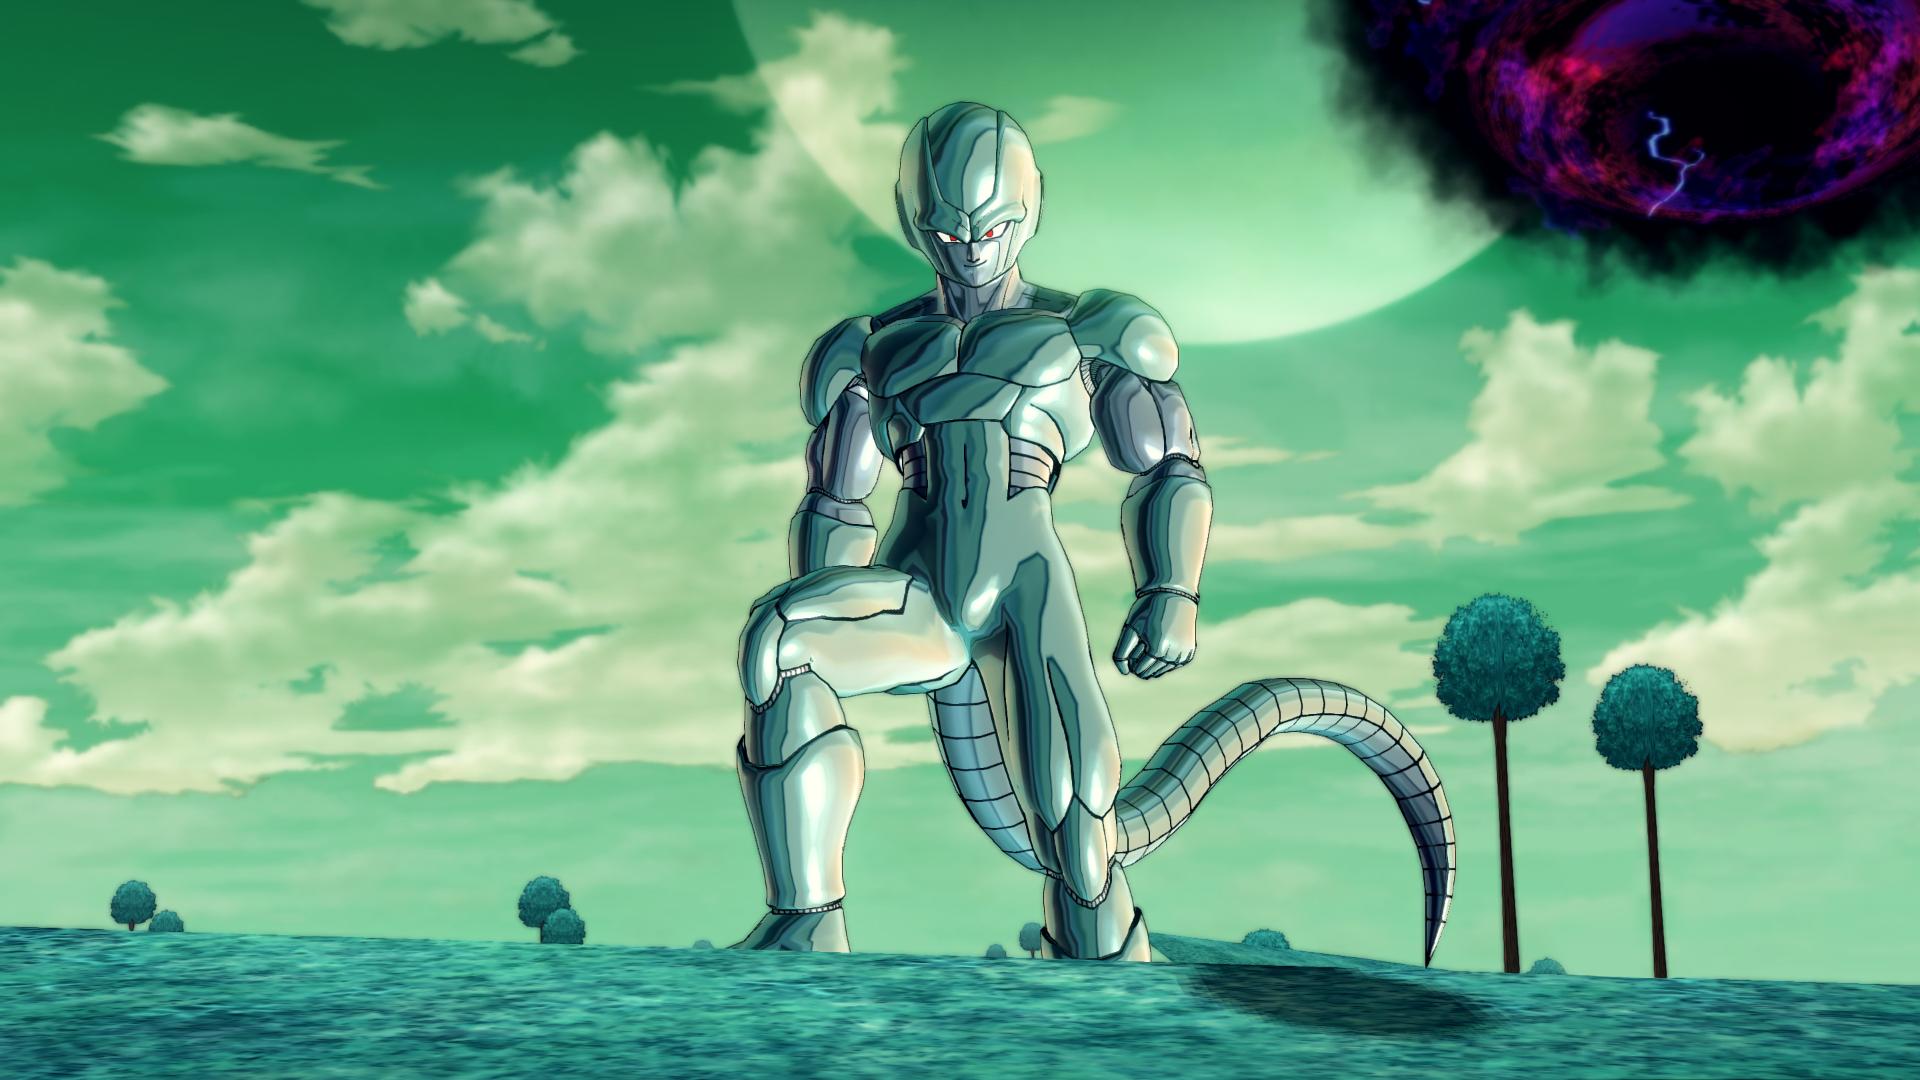 Dragon Ball Xenoverse 2 Review's About Time